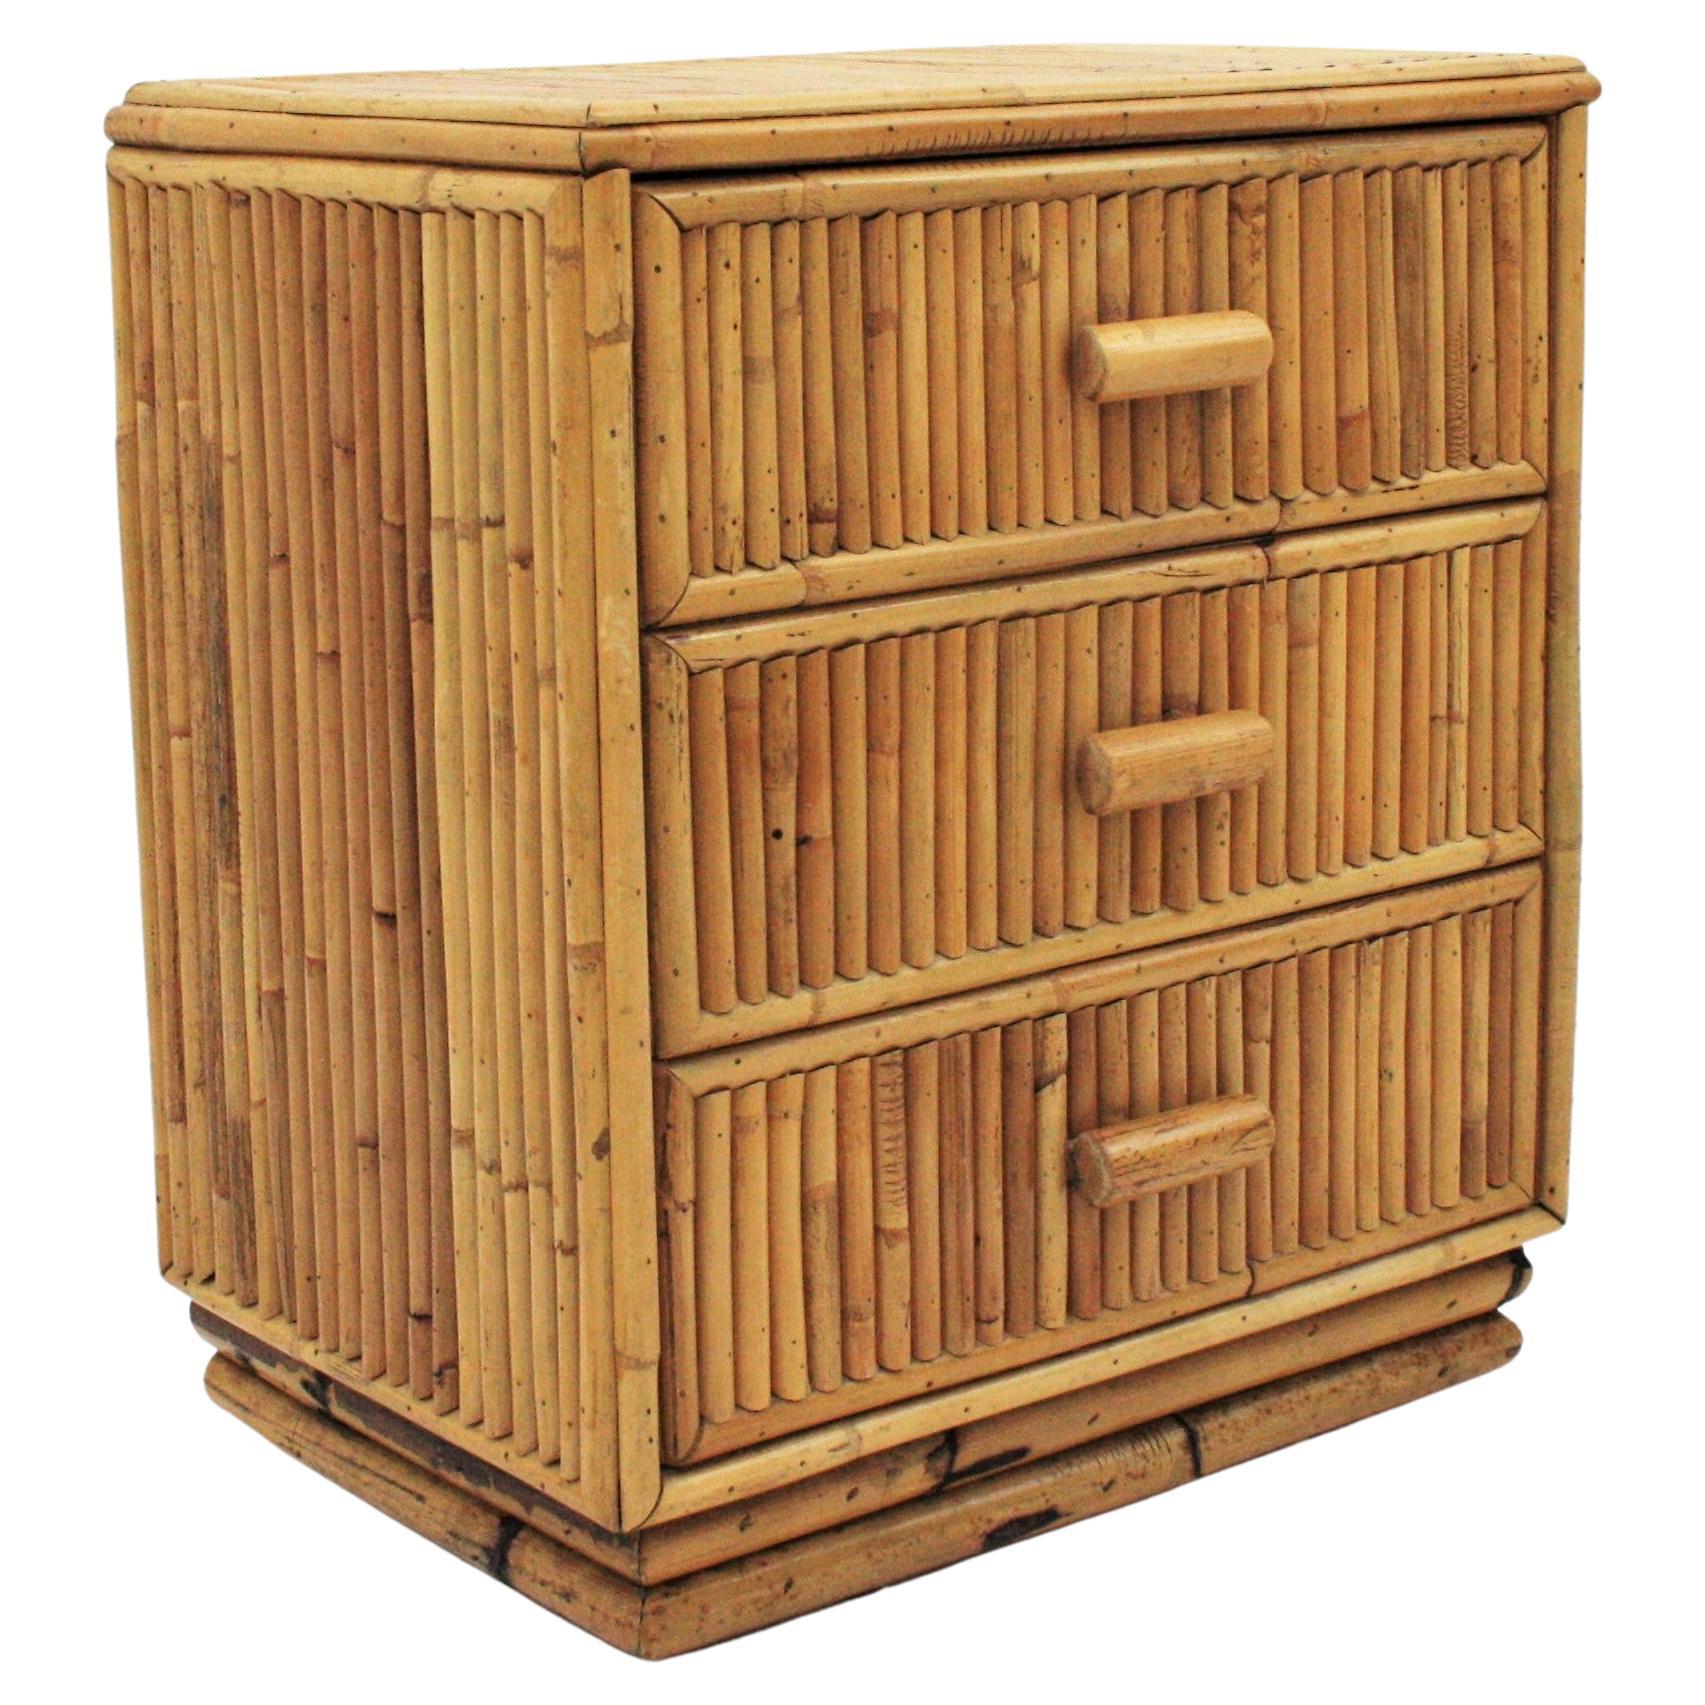 Spanish modern rattan bamboo three-drawer end table stand or small chest, 1970s.
Beautiful bamboo small chest, end table or nightstand for a summer house or any decoration with natural materials.
This bedside table has a wood and bamboo